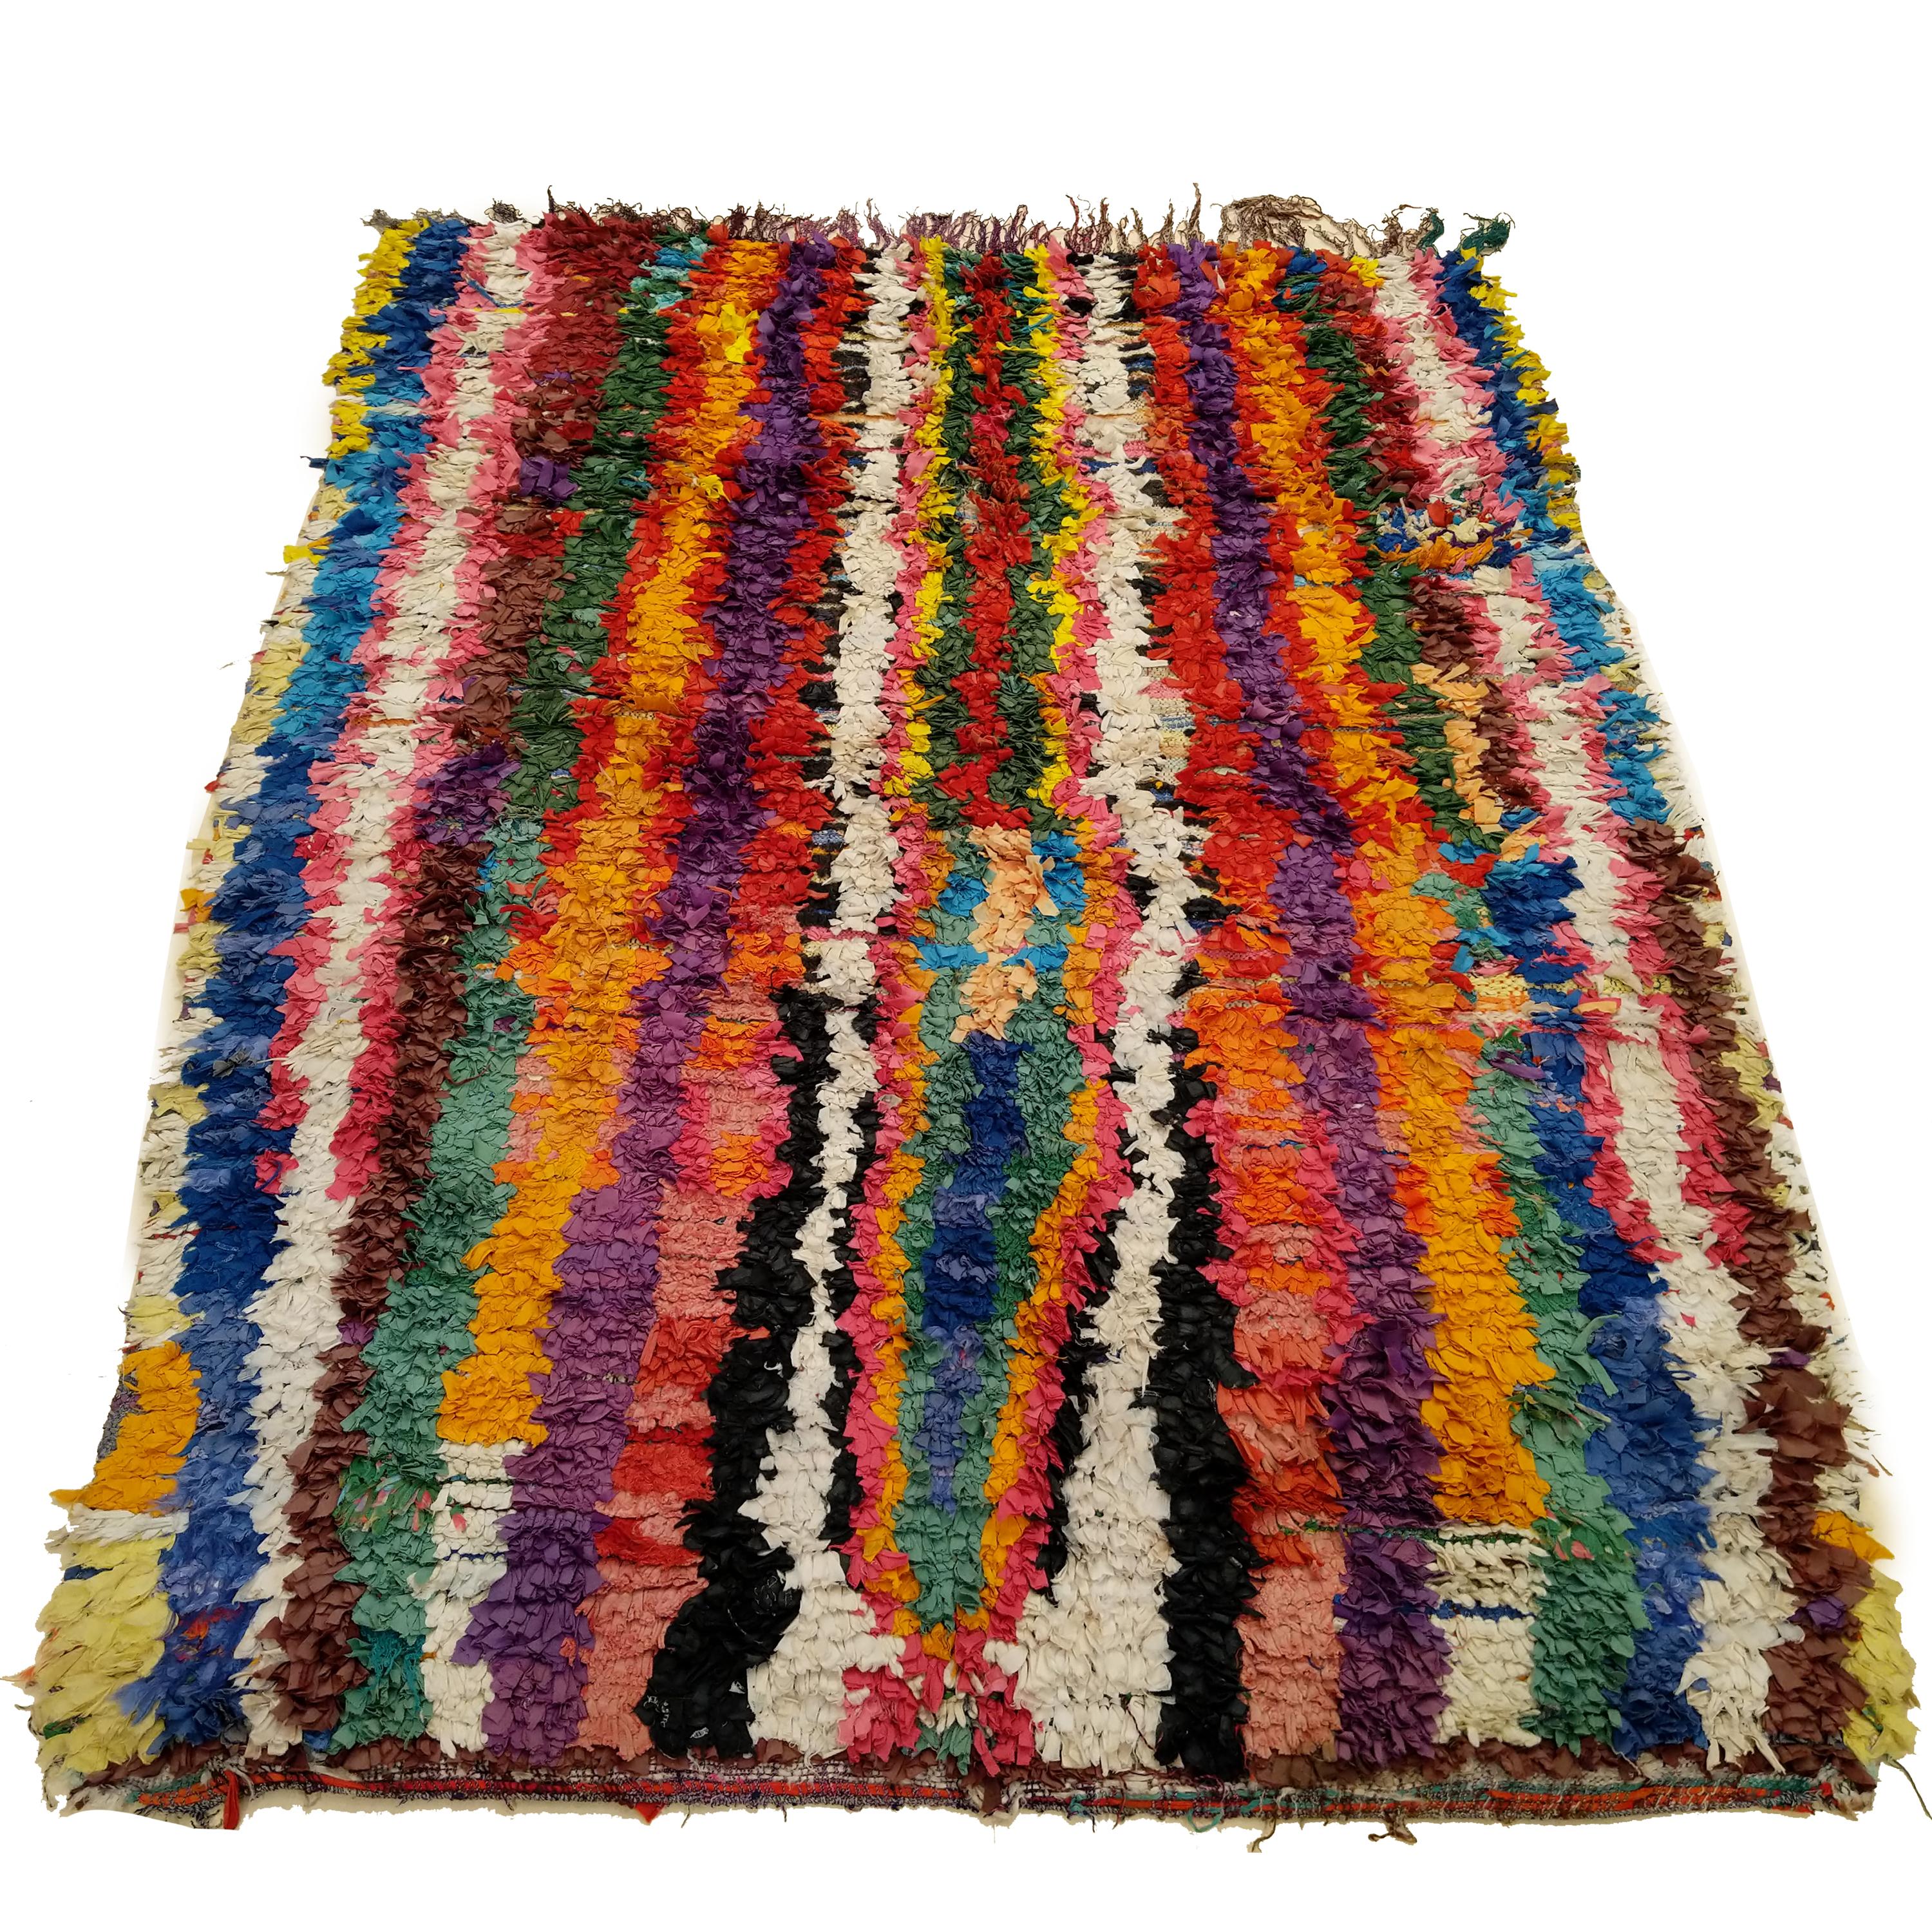 A very unusual Berber rug from the Boujad region, located on the foothills of the central High Atlas mountains of Morocco, characterized by a bold, brushwork-like pattern of stacked niche-like elements culminating in a central niche leading into a